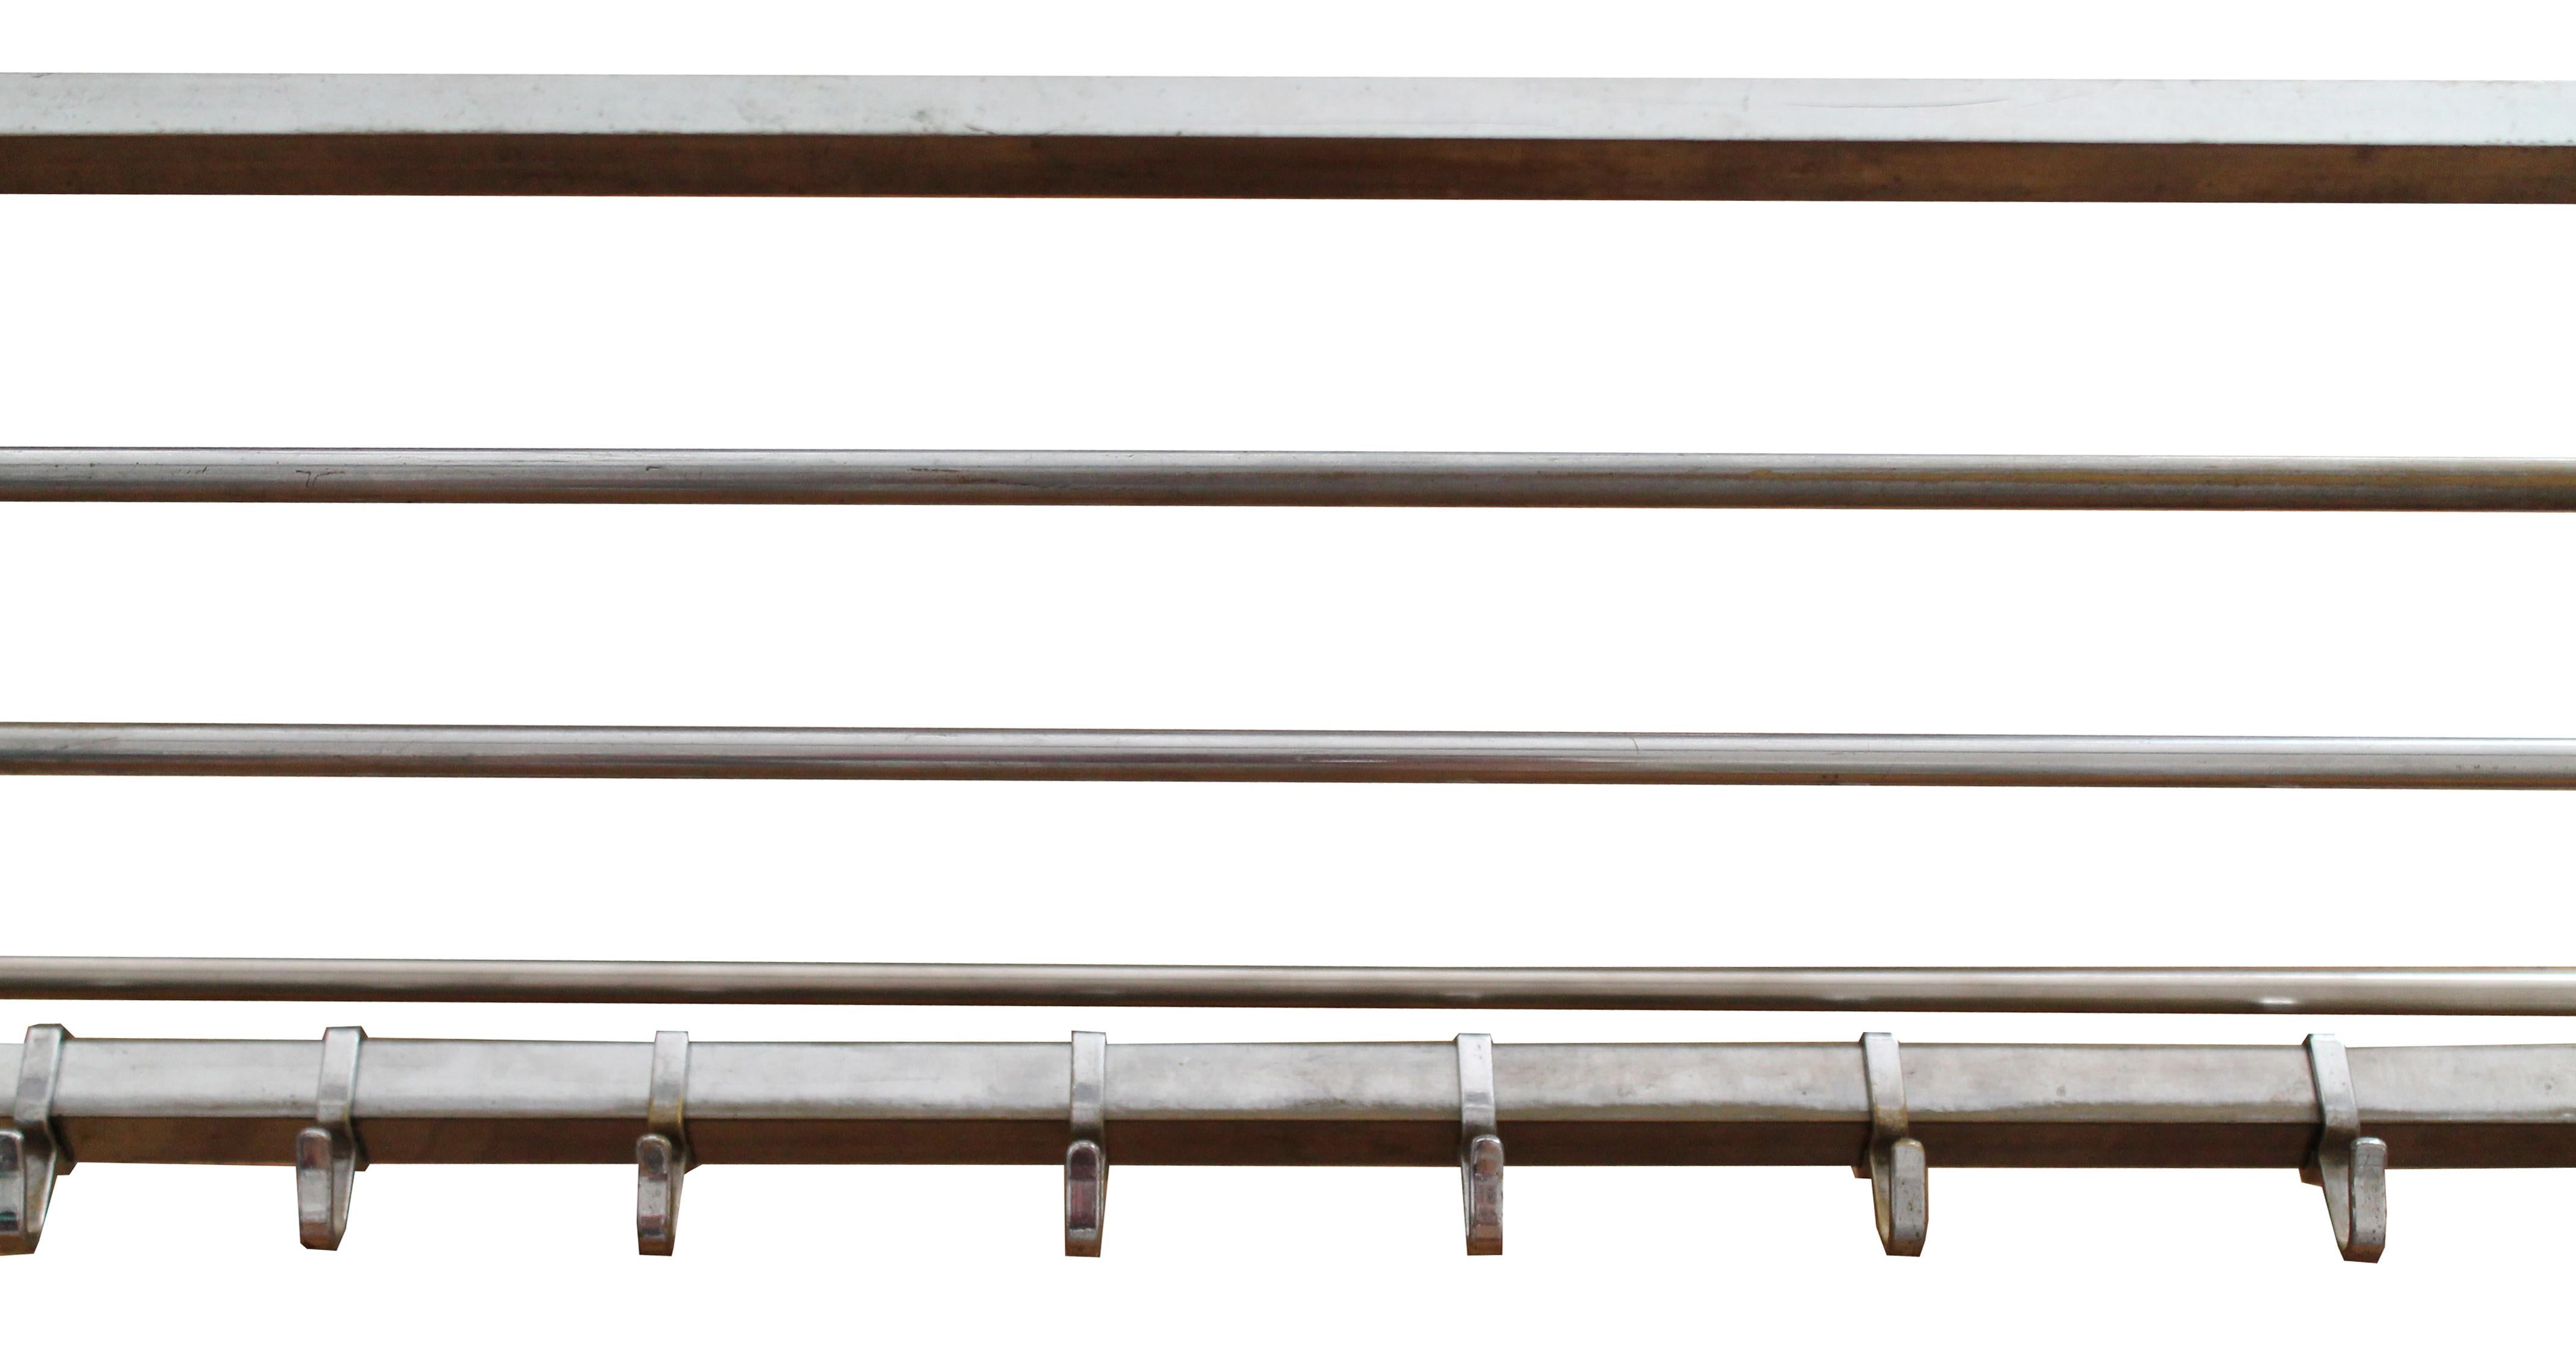 Pair of Art Deco Nickel-Plated Brass Wall Hung Coat Racks In Good Condition For Sale In Brno, CZ